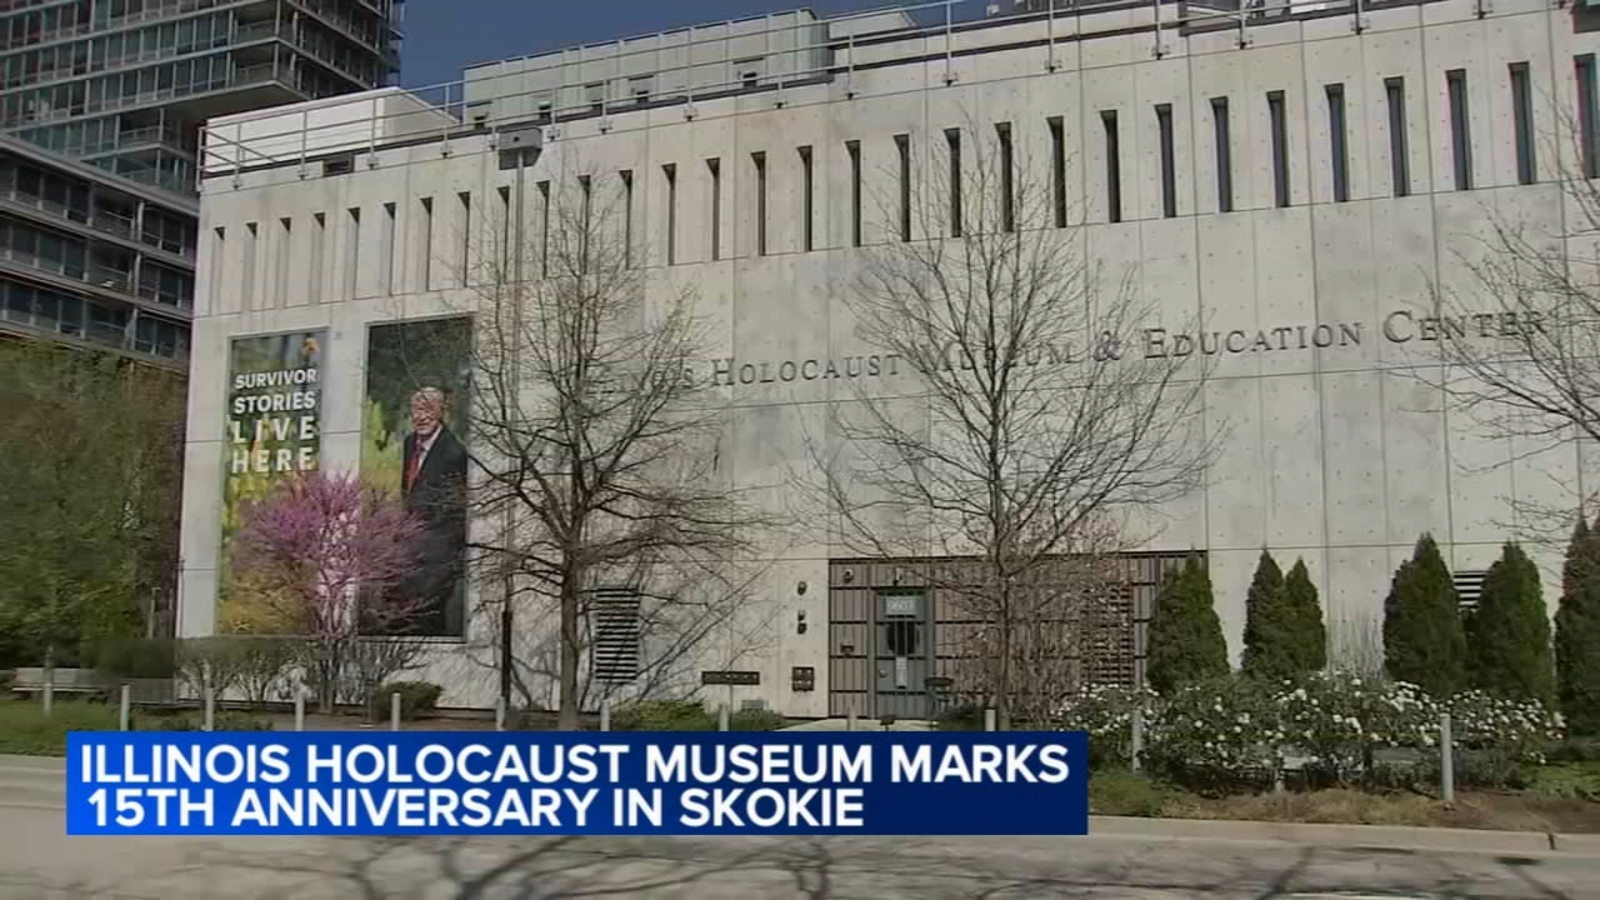 Illinois Holocaust Museum and Education Center celebrates 15th anniversary in current Skokie location [Video]